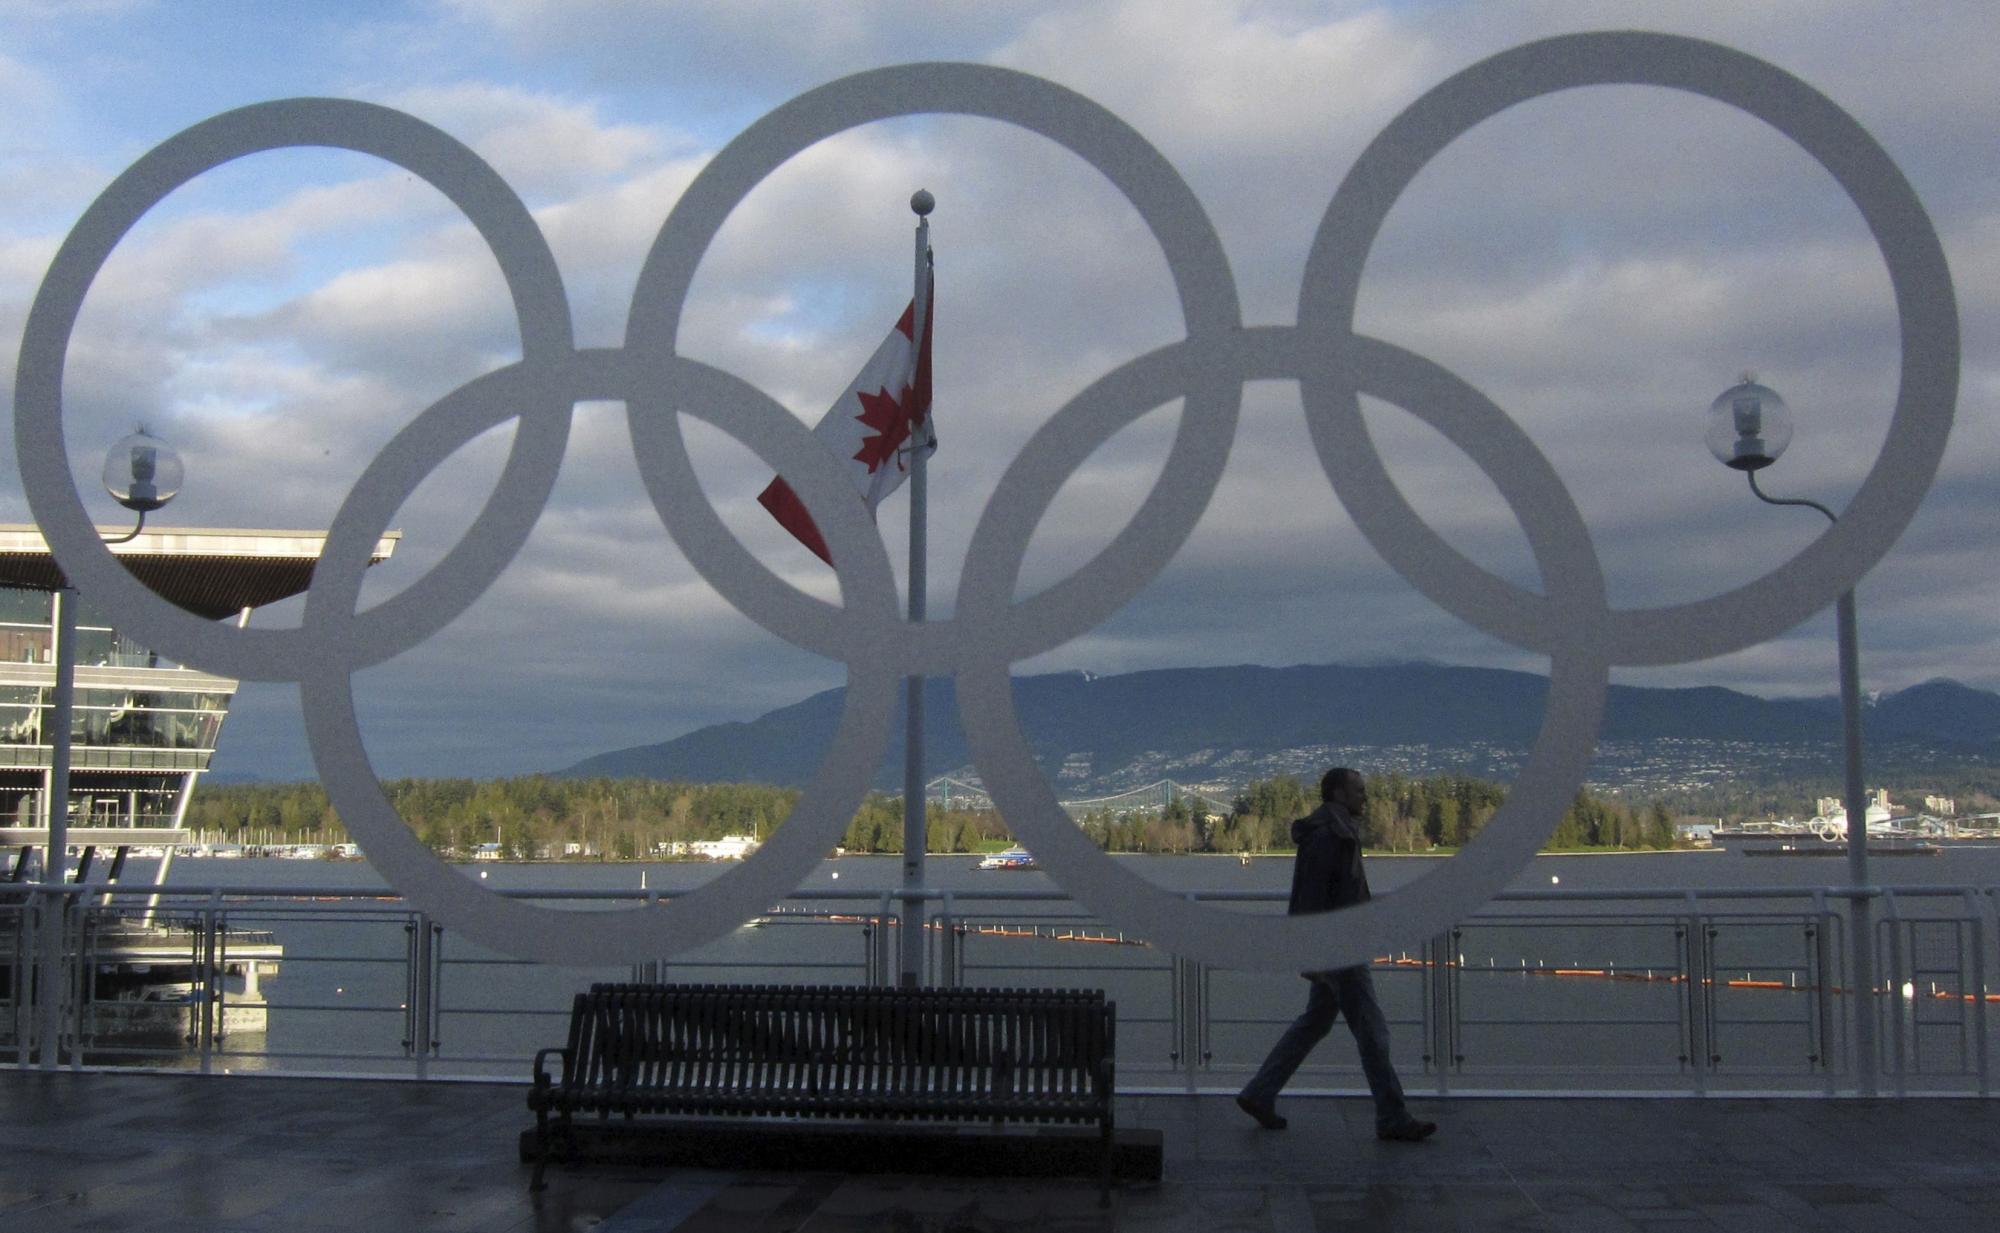 Snapshots of Vancouver before Winter Games